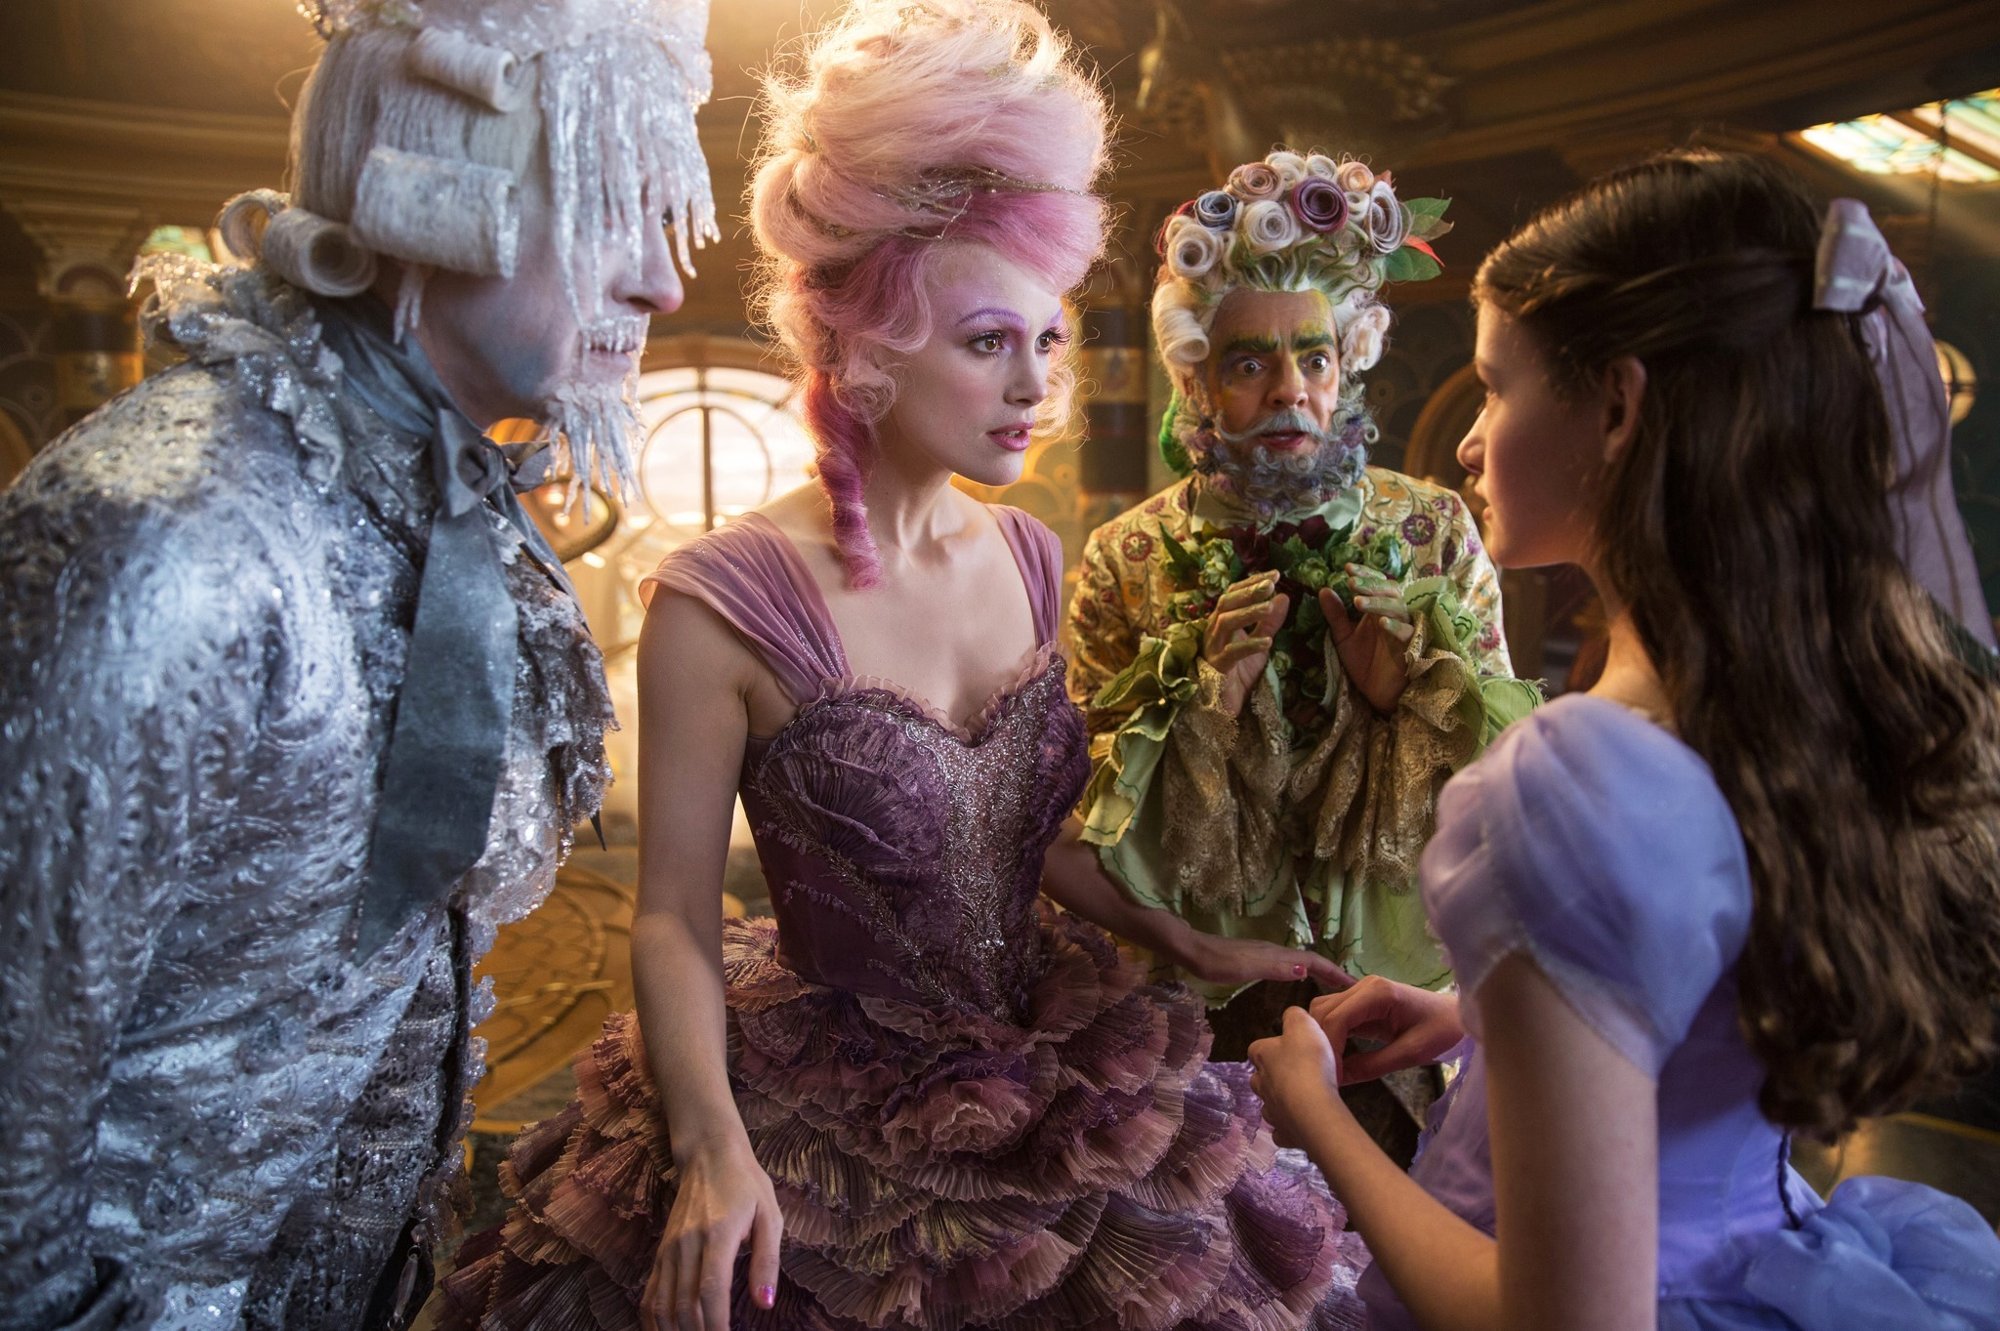 Richard E. Grant, Keira Knightley, Eugenio Derbez and Mackenzie Foy in Walt Disney Pictures' The Nutcracker and the Four Realms (2018)